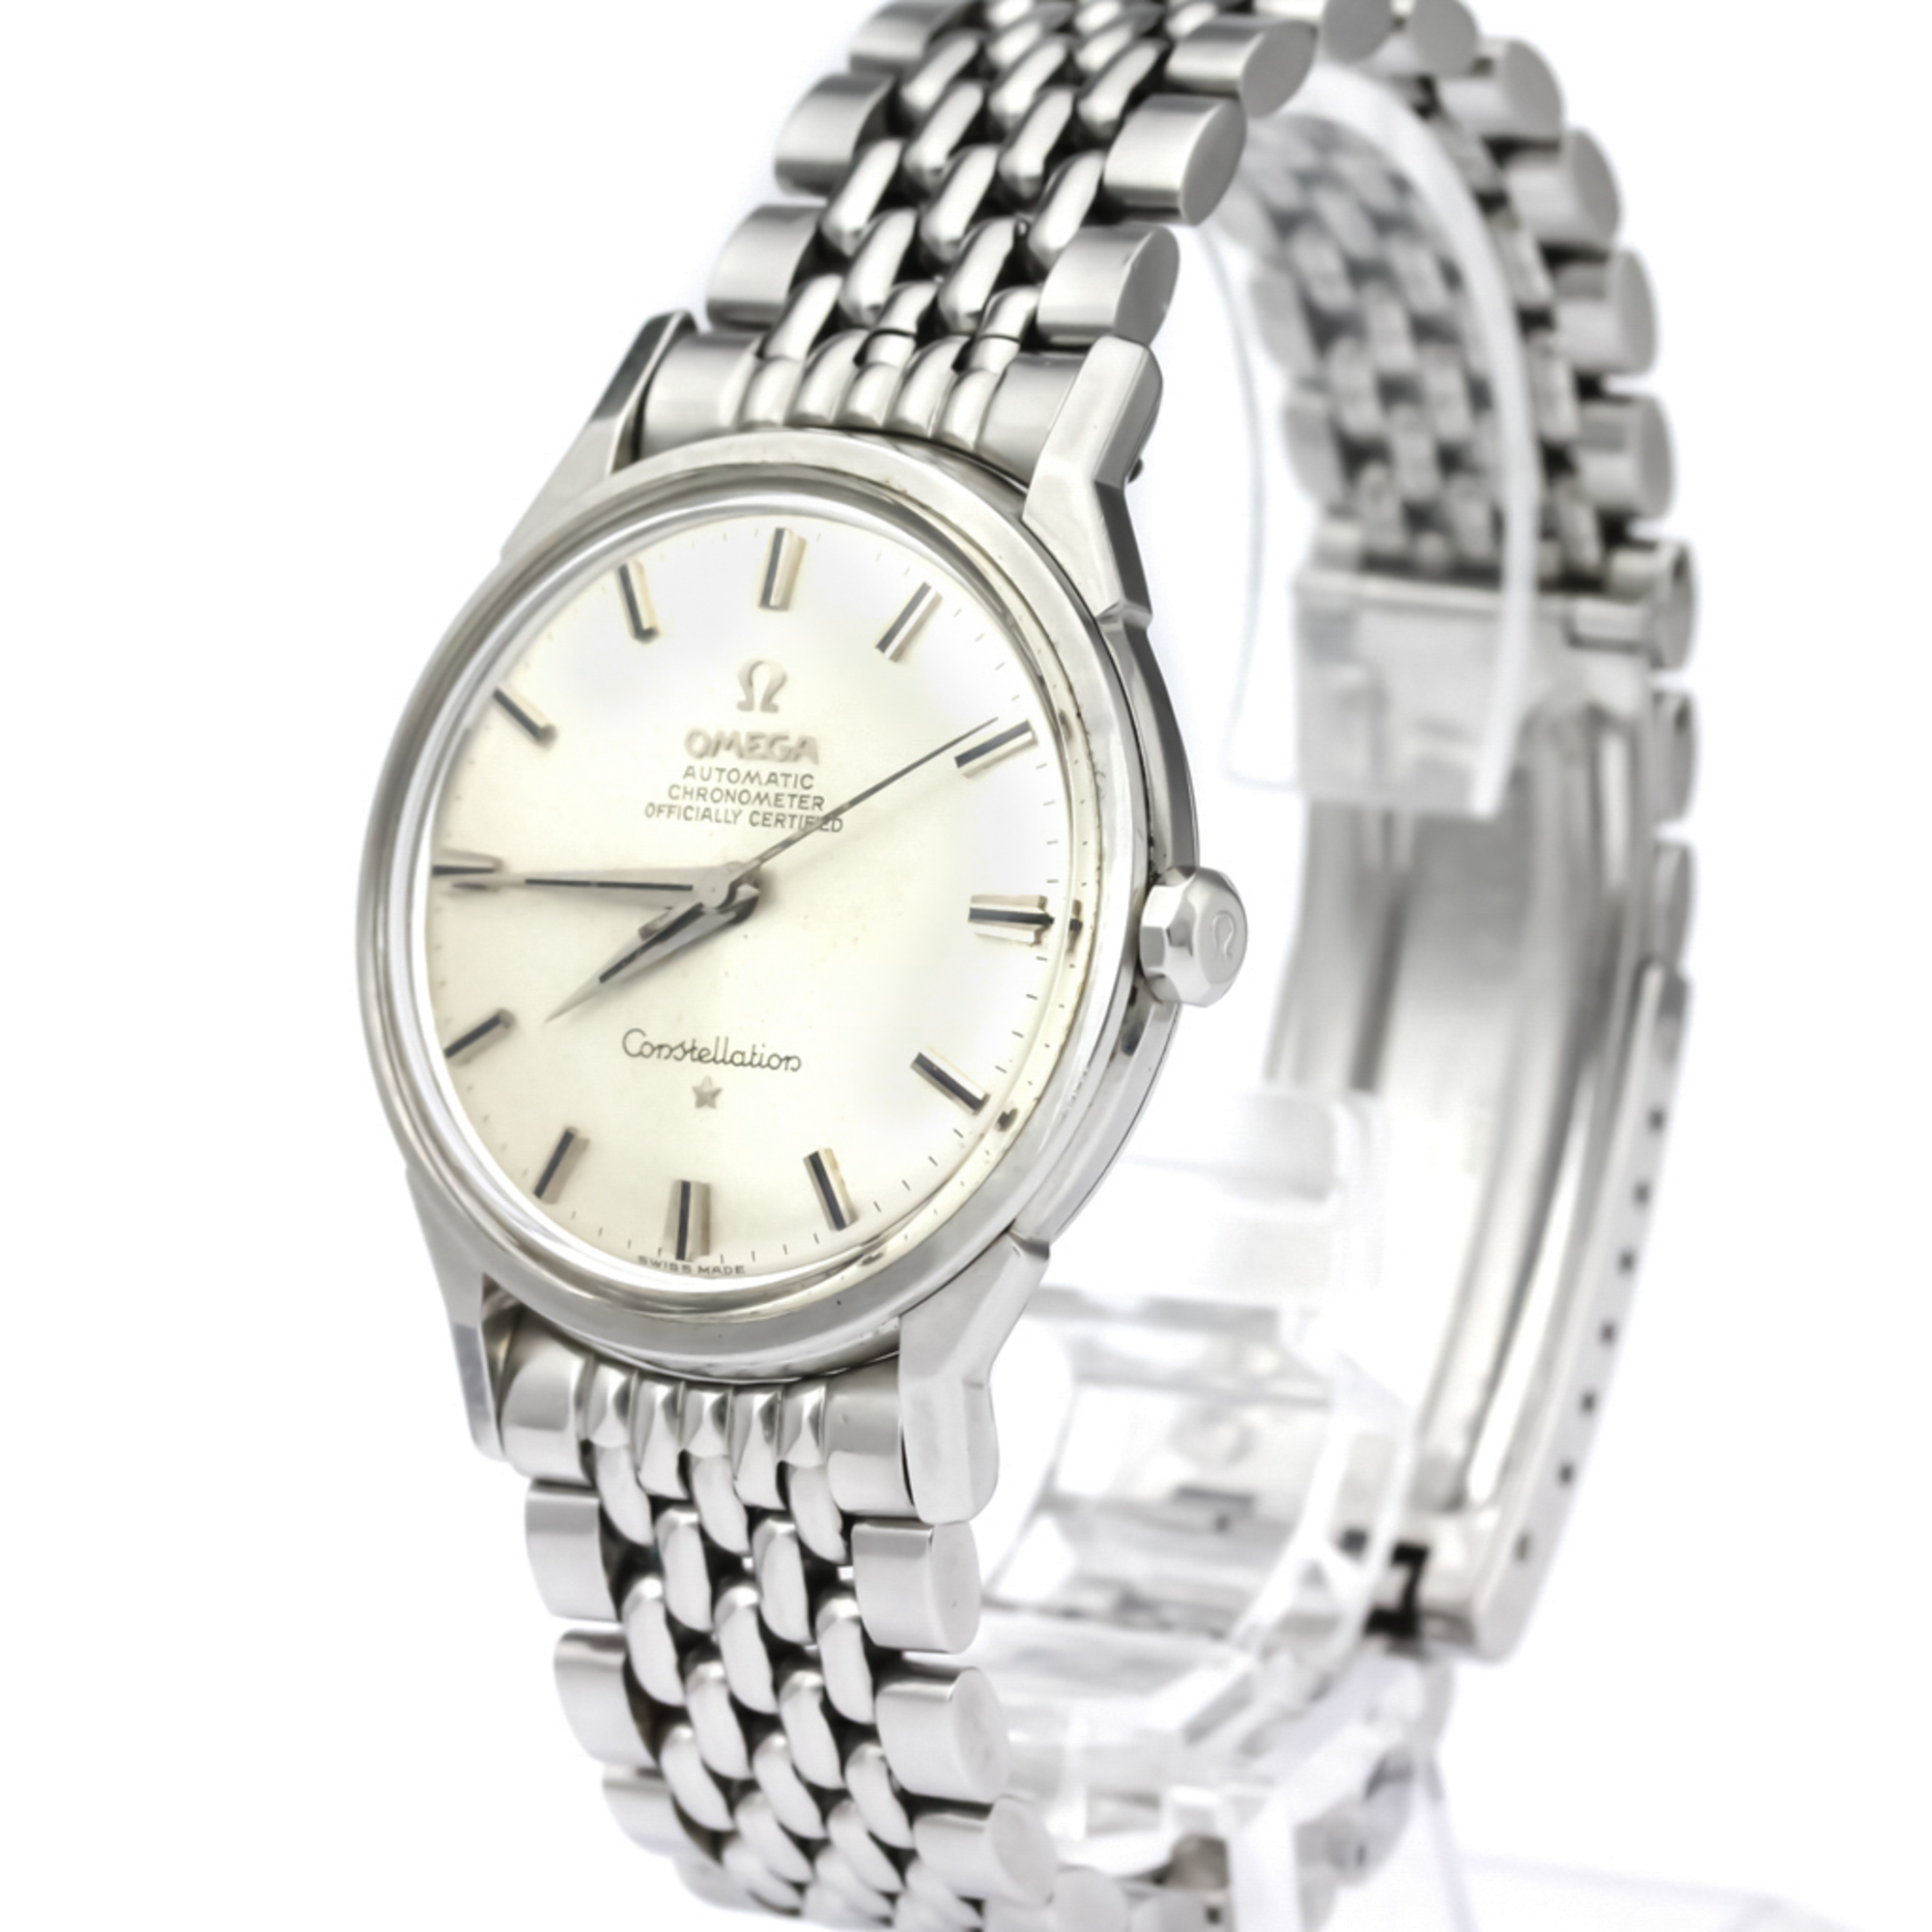 Omega Constellation Automatic Stainless Steel Men's Dress Watch 167.005